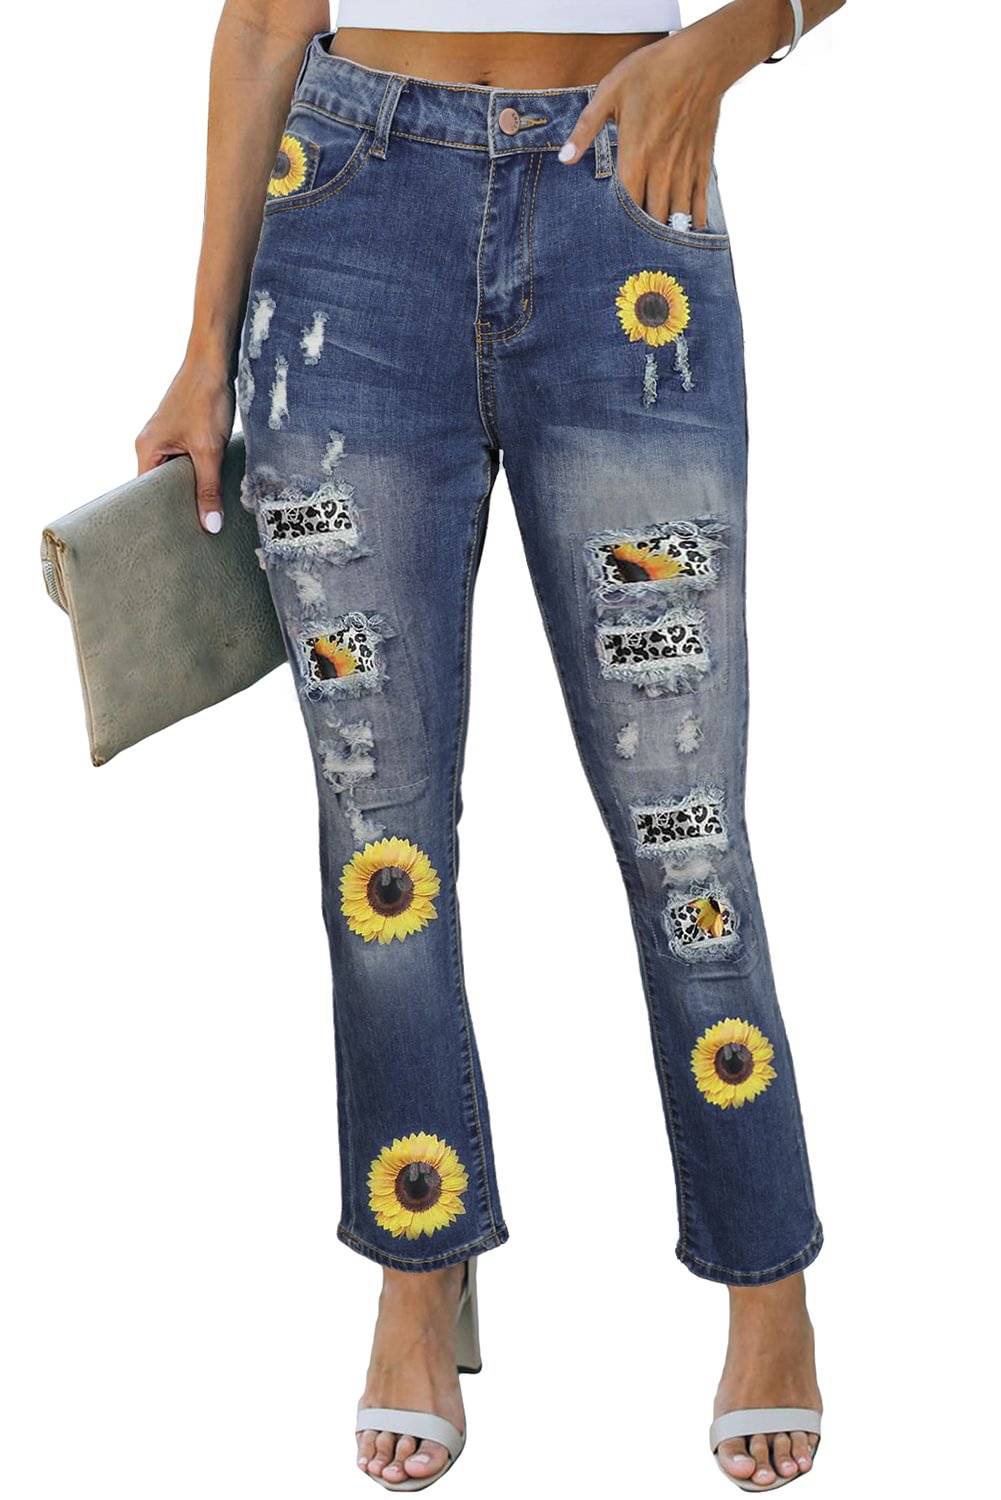 MusePointer Women's Ripped Jeans Low Waist Sunflower Leopard Cut-out Ripped Jeans MusePointer